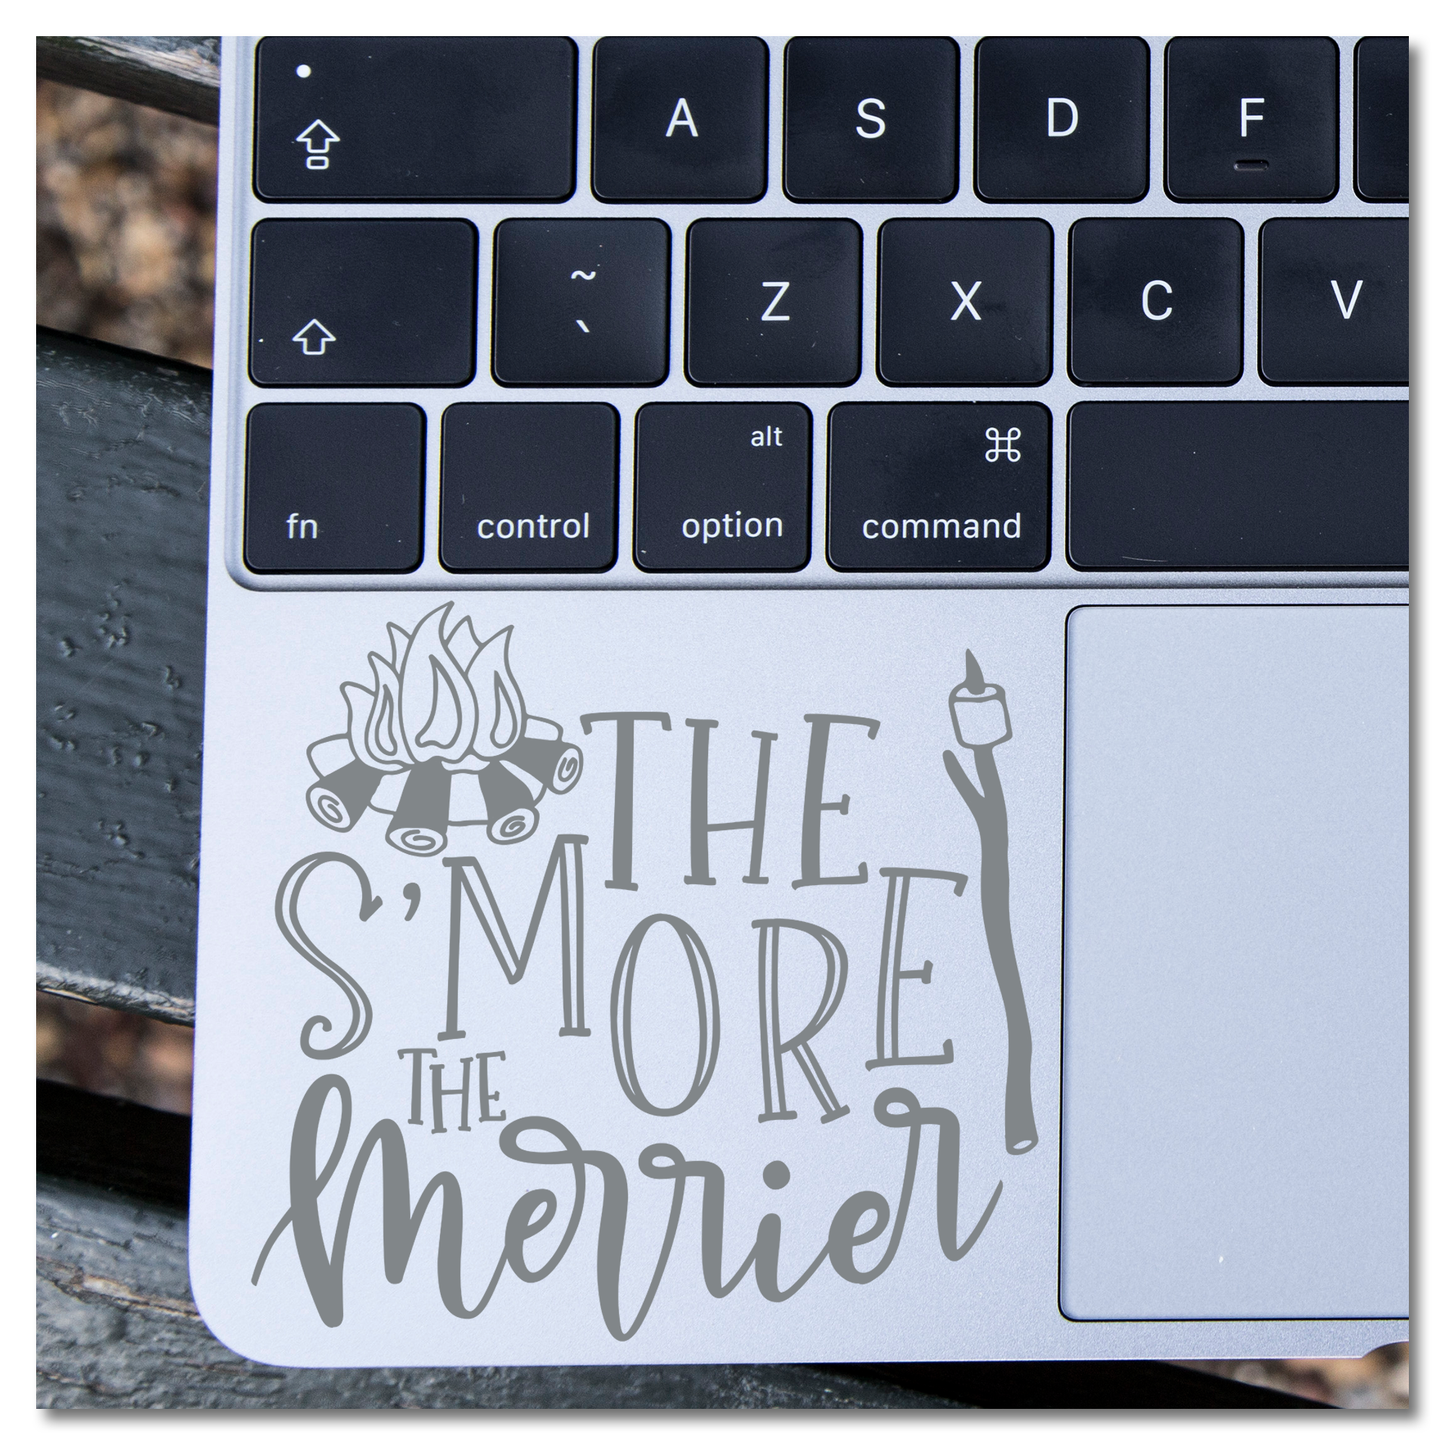 The S'more The Merrier Vinyl Decal Sticker